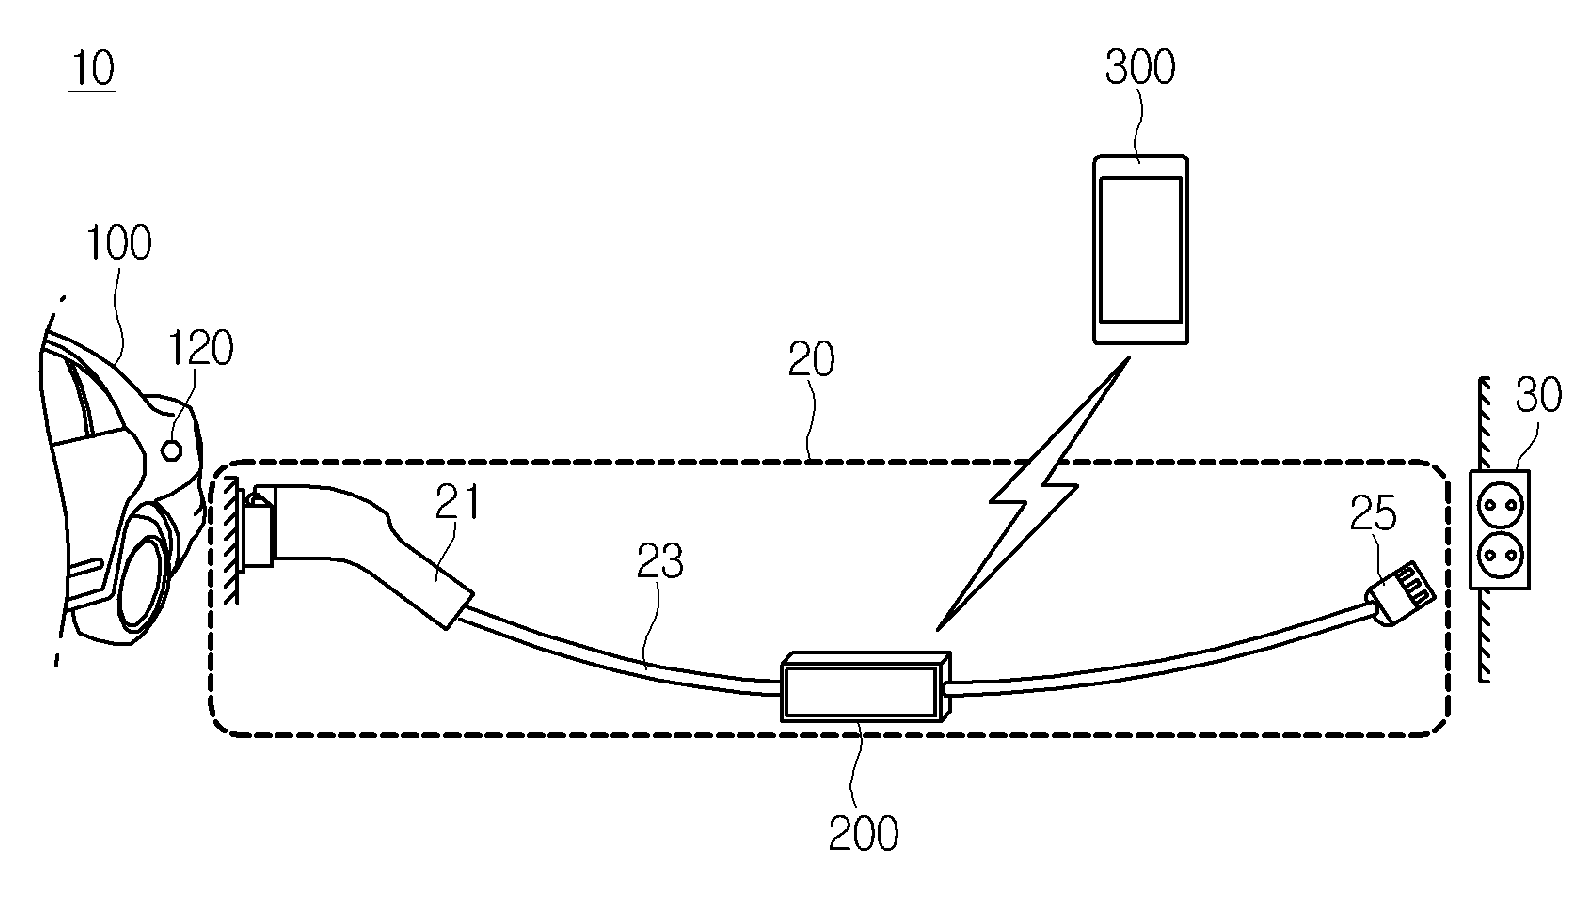 Add-on communication apparatus attached to in-cable charging control device and operating method thereof